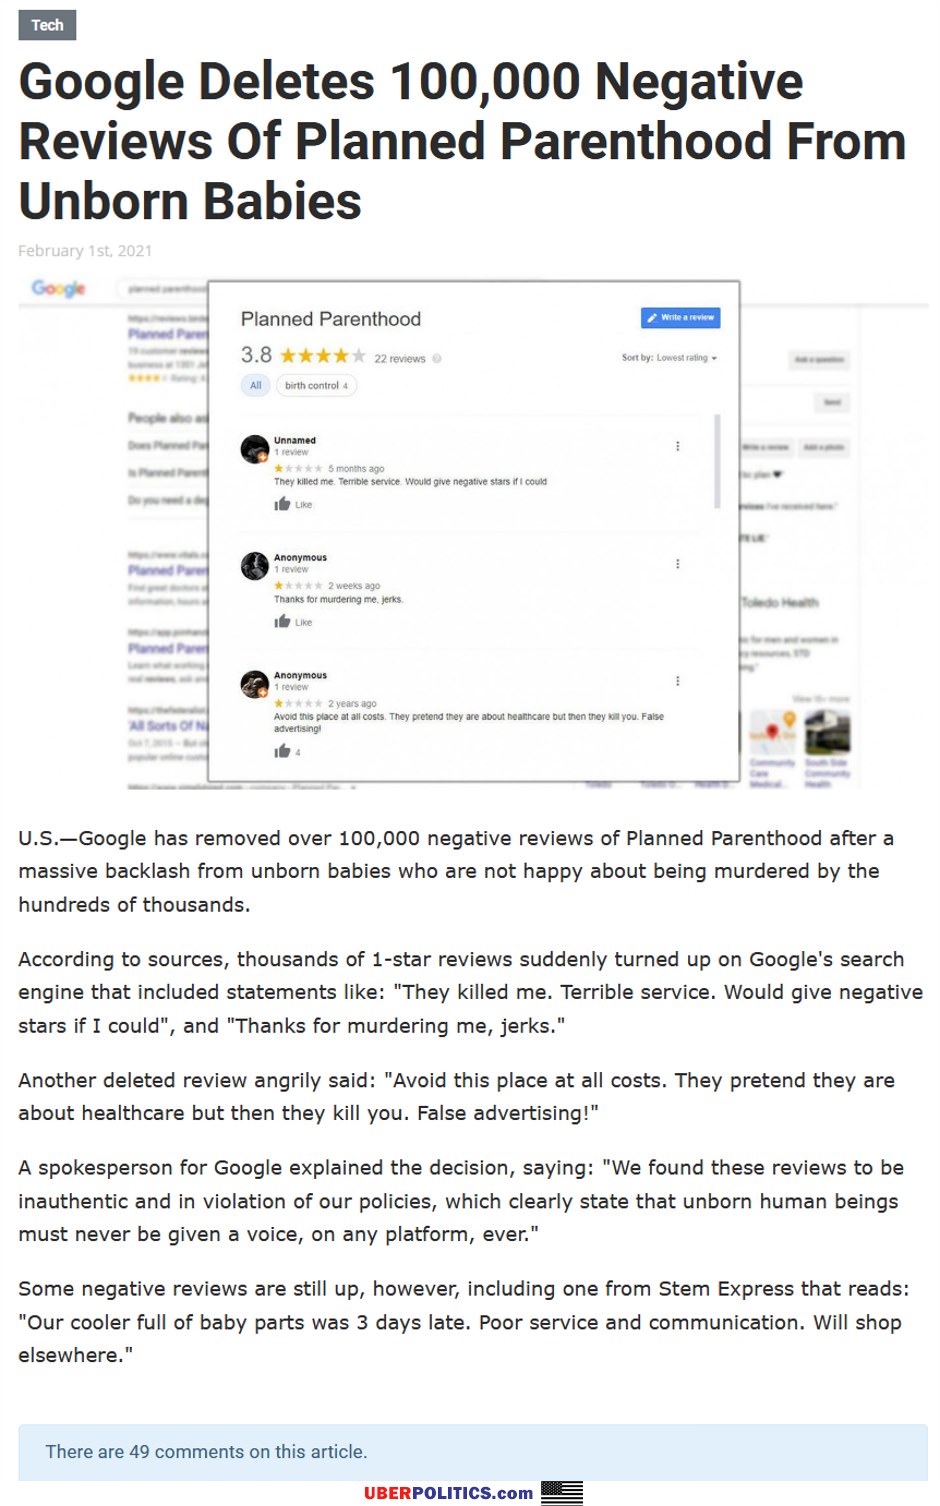 Google Deleted Reviews